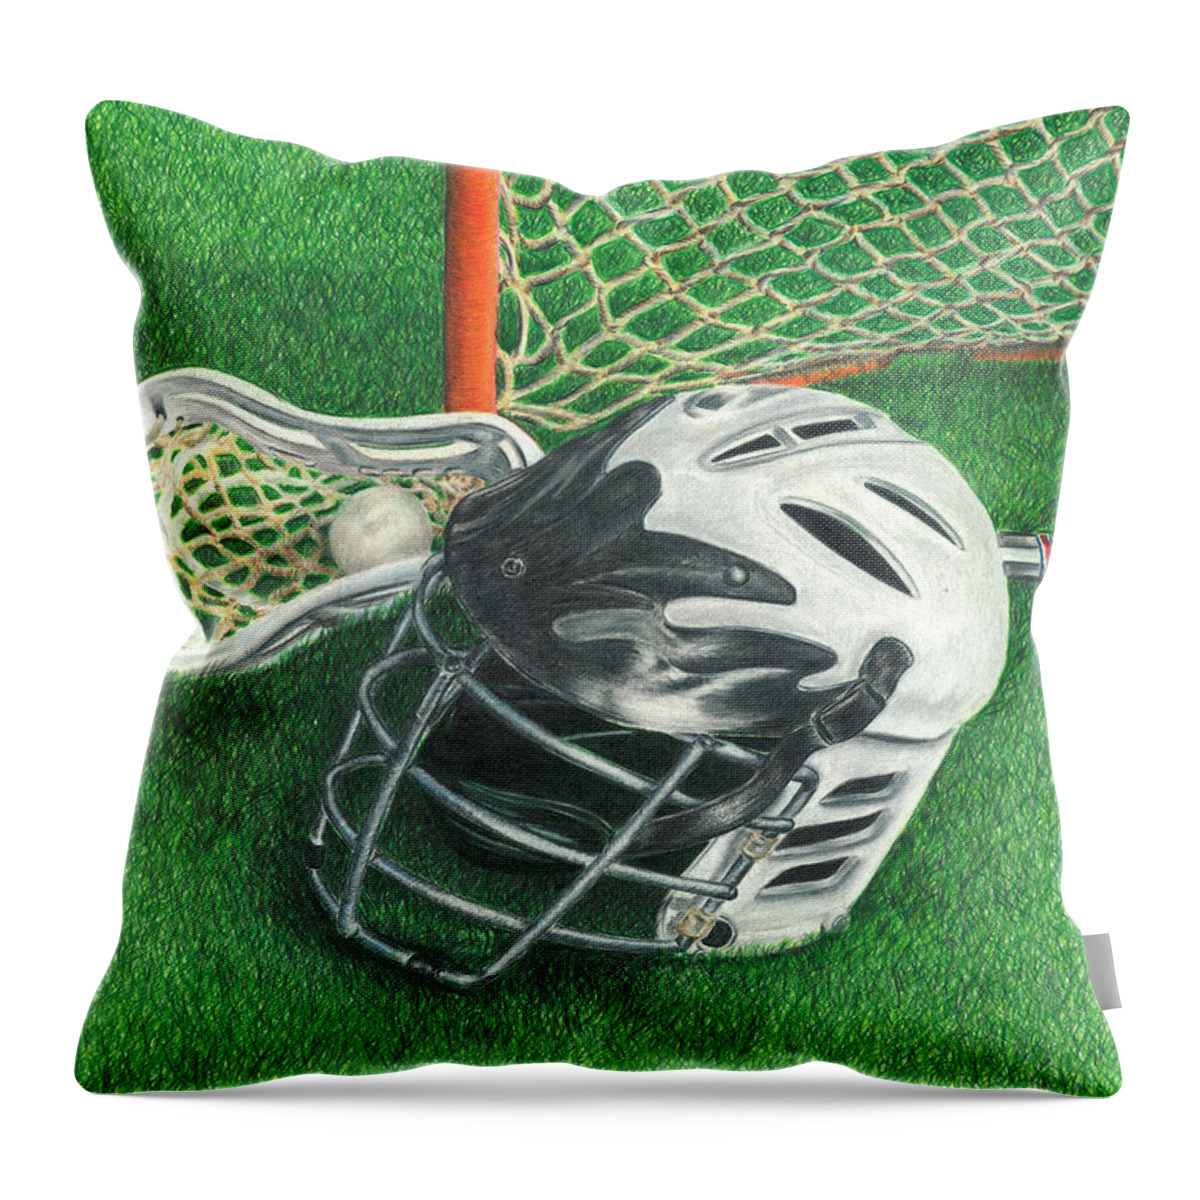 Lacrosse Throw Pillow featuring the drawing Lacrosse by Troy Levesque